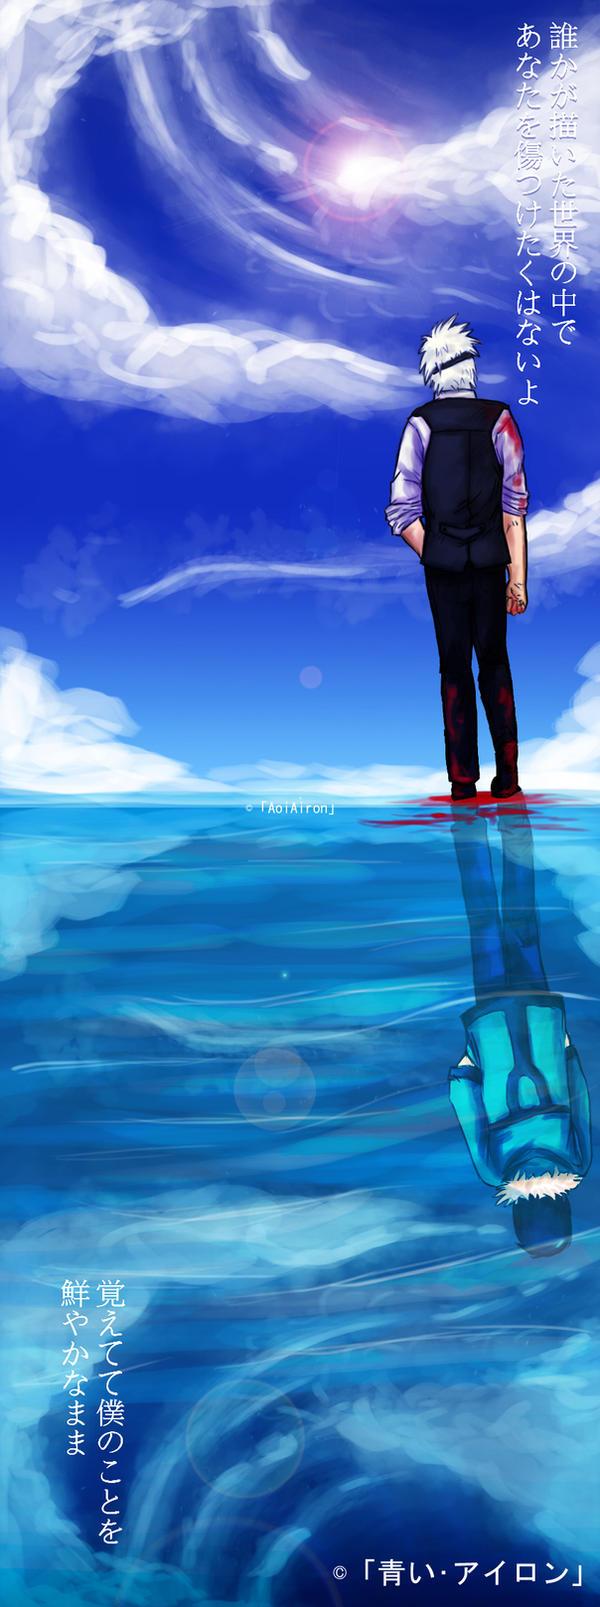 Tokyo Ghoul Remember me the way I used to be by AoiAiron on